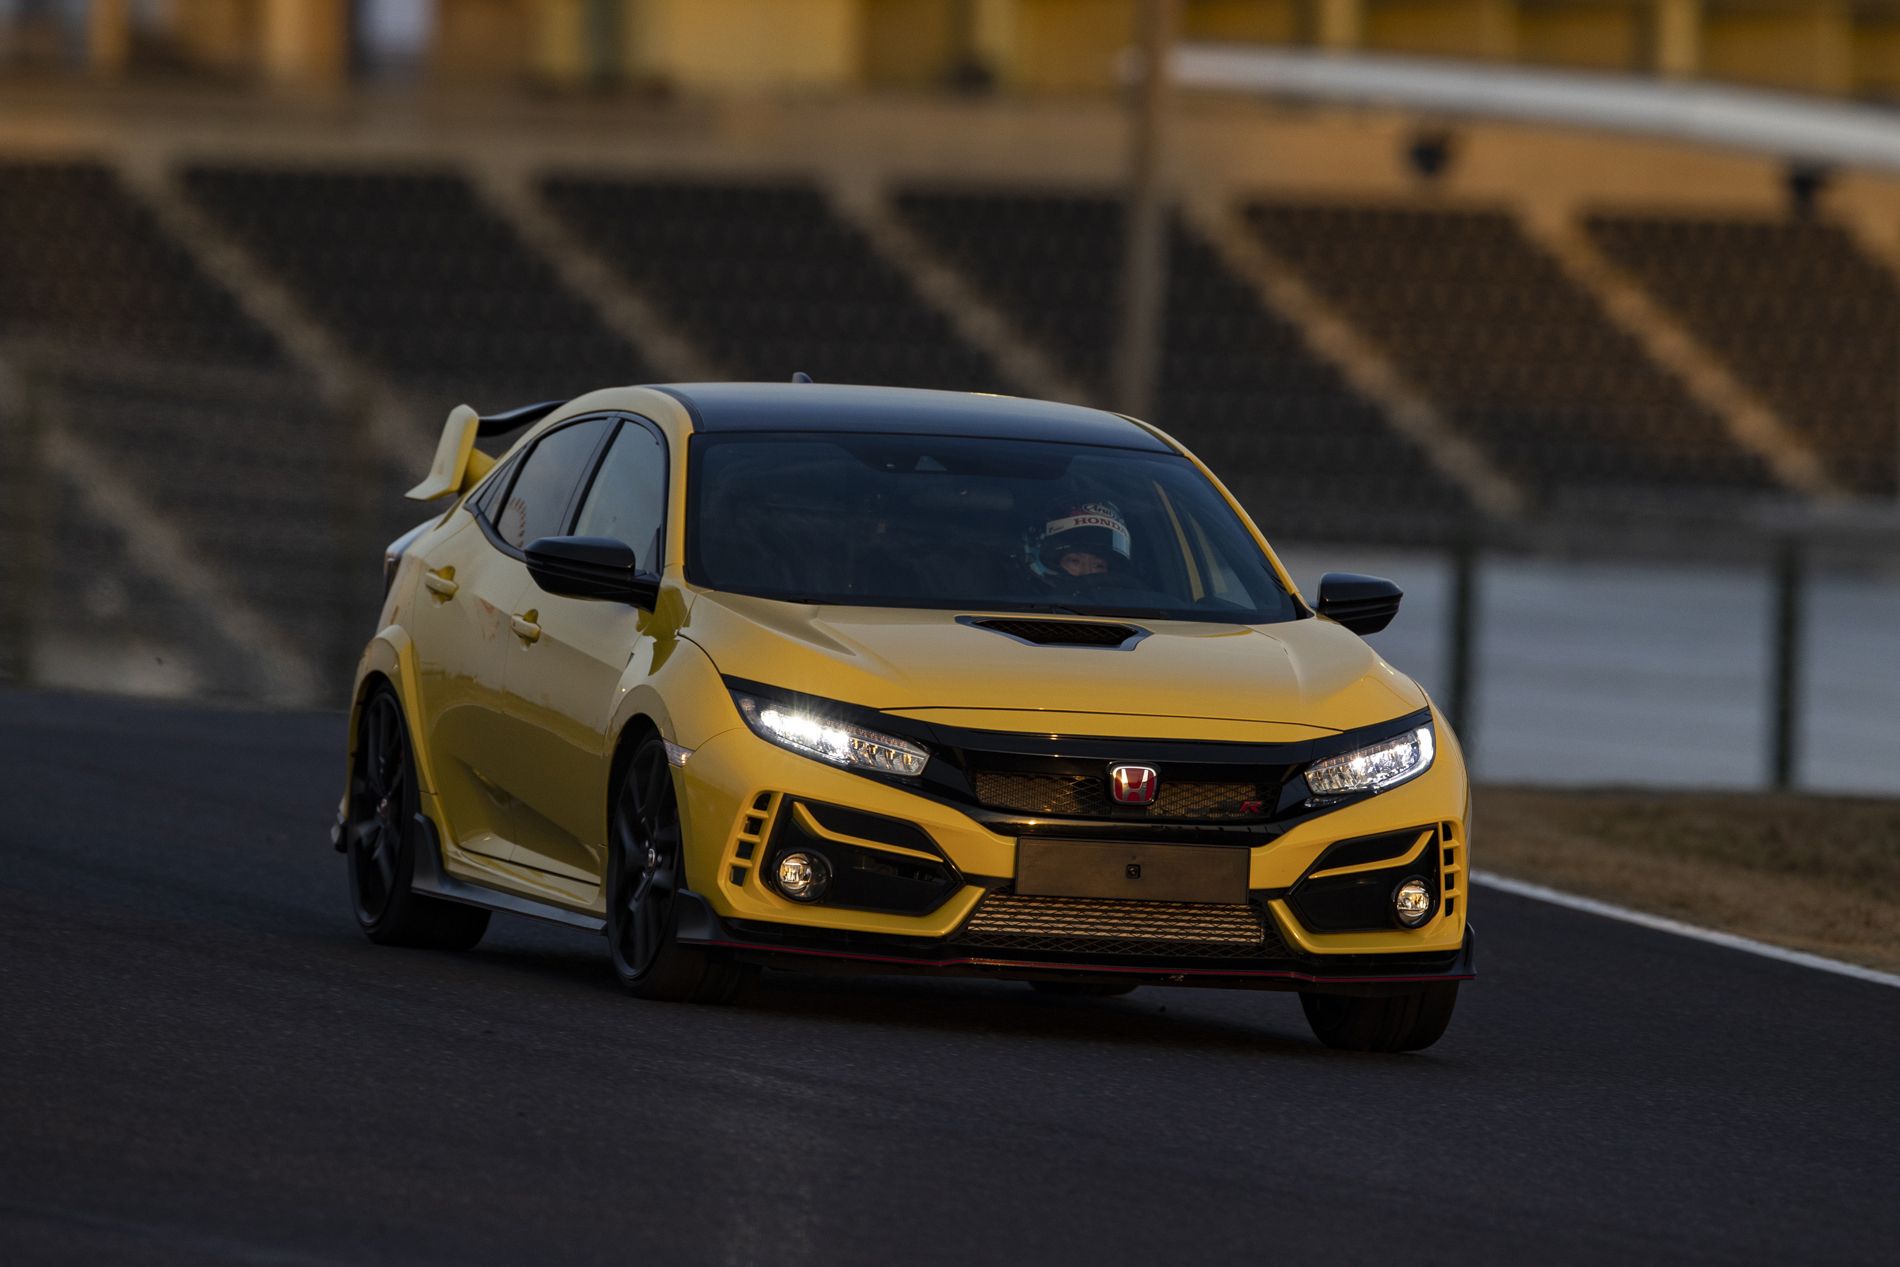 2021 Honda Civic Type R Limited Edition First Drive: Weight Watcher